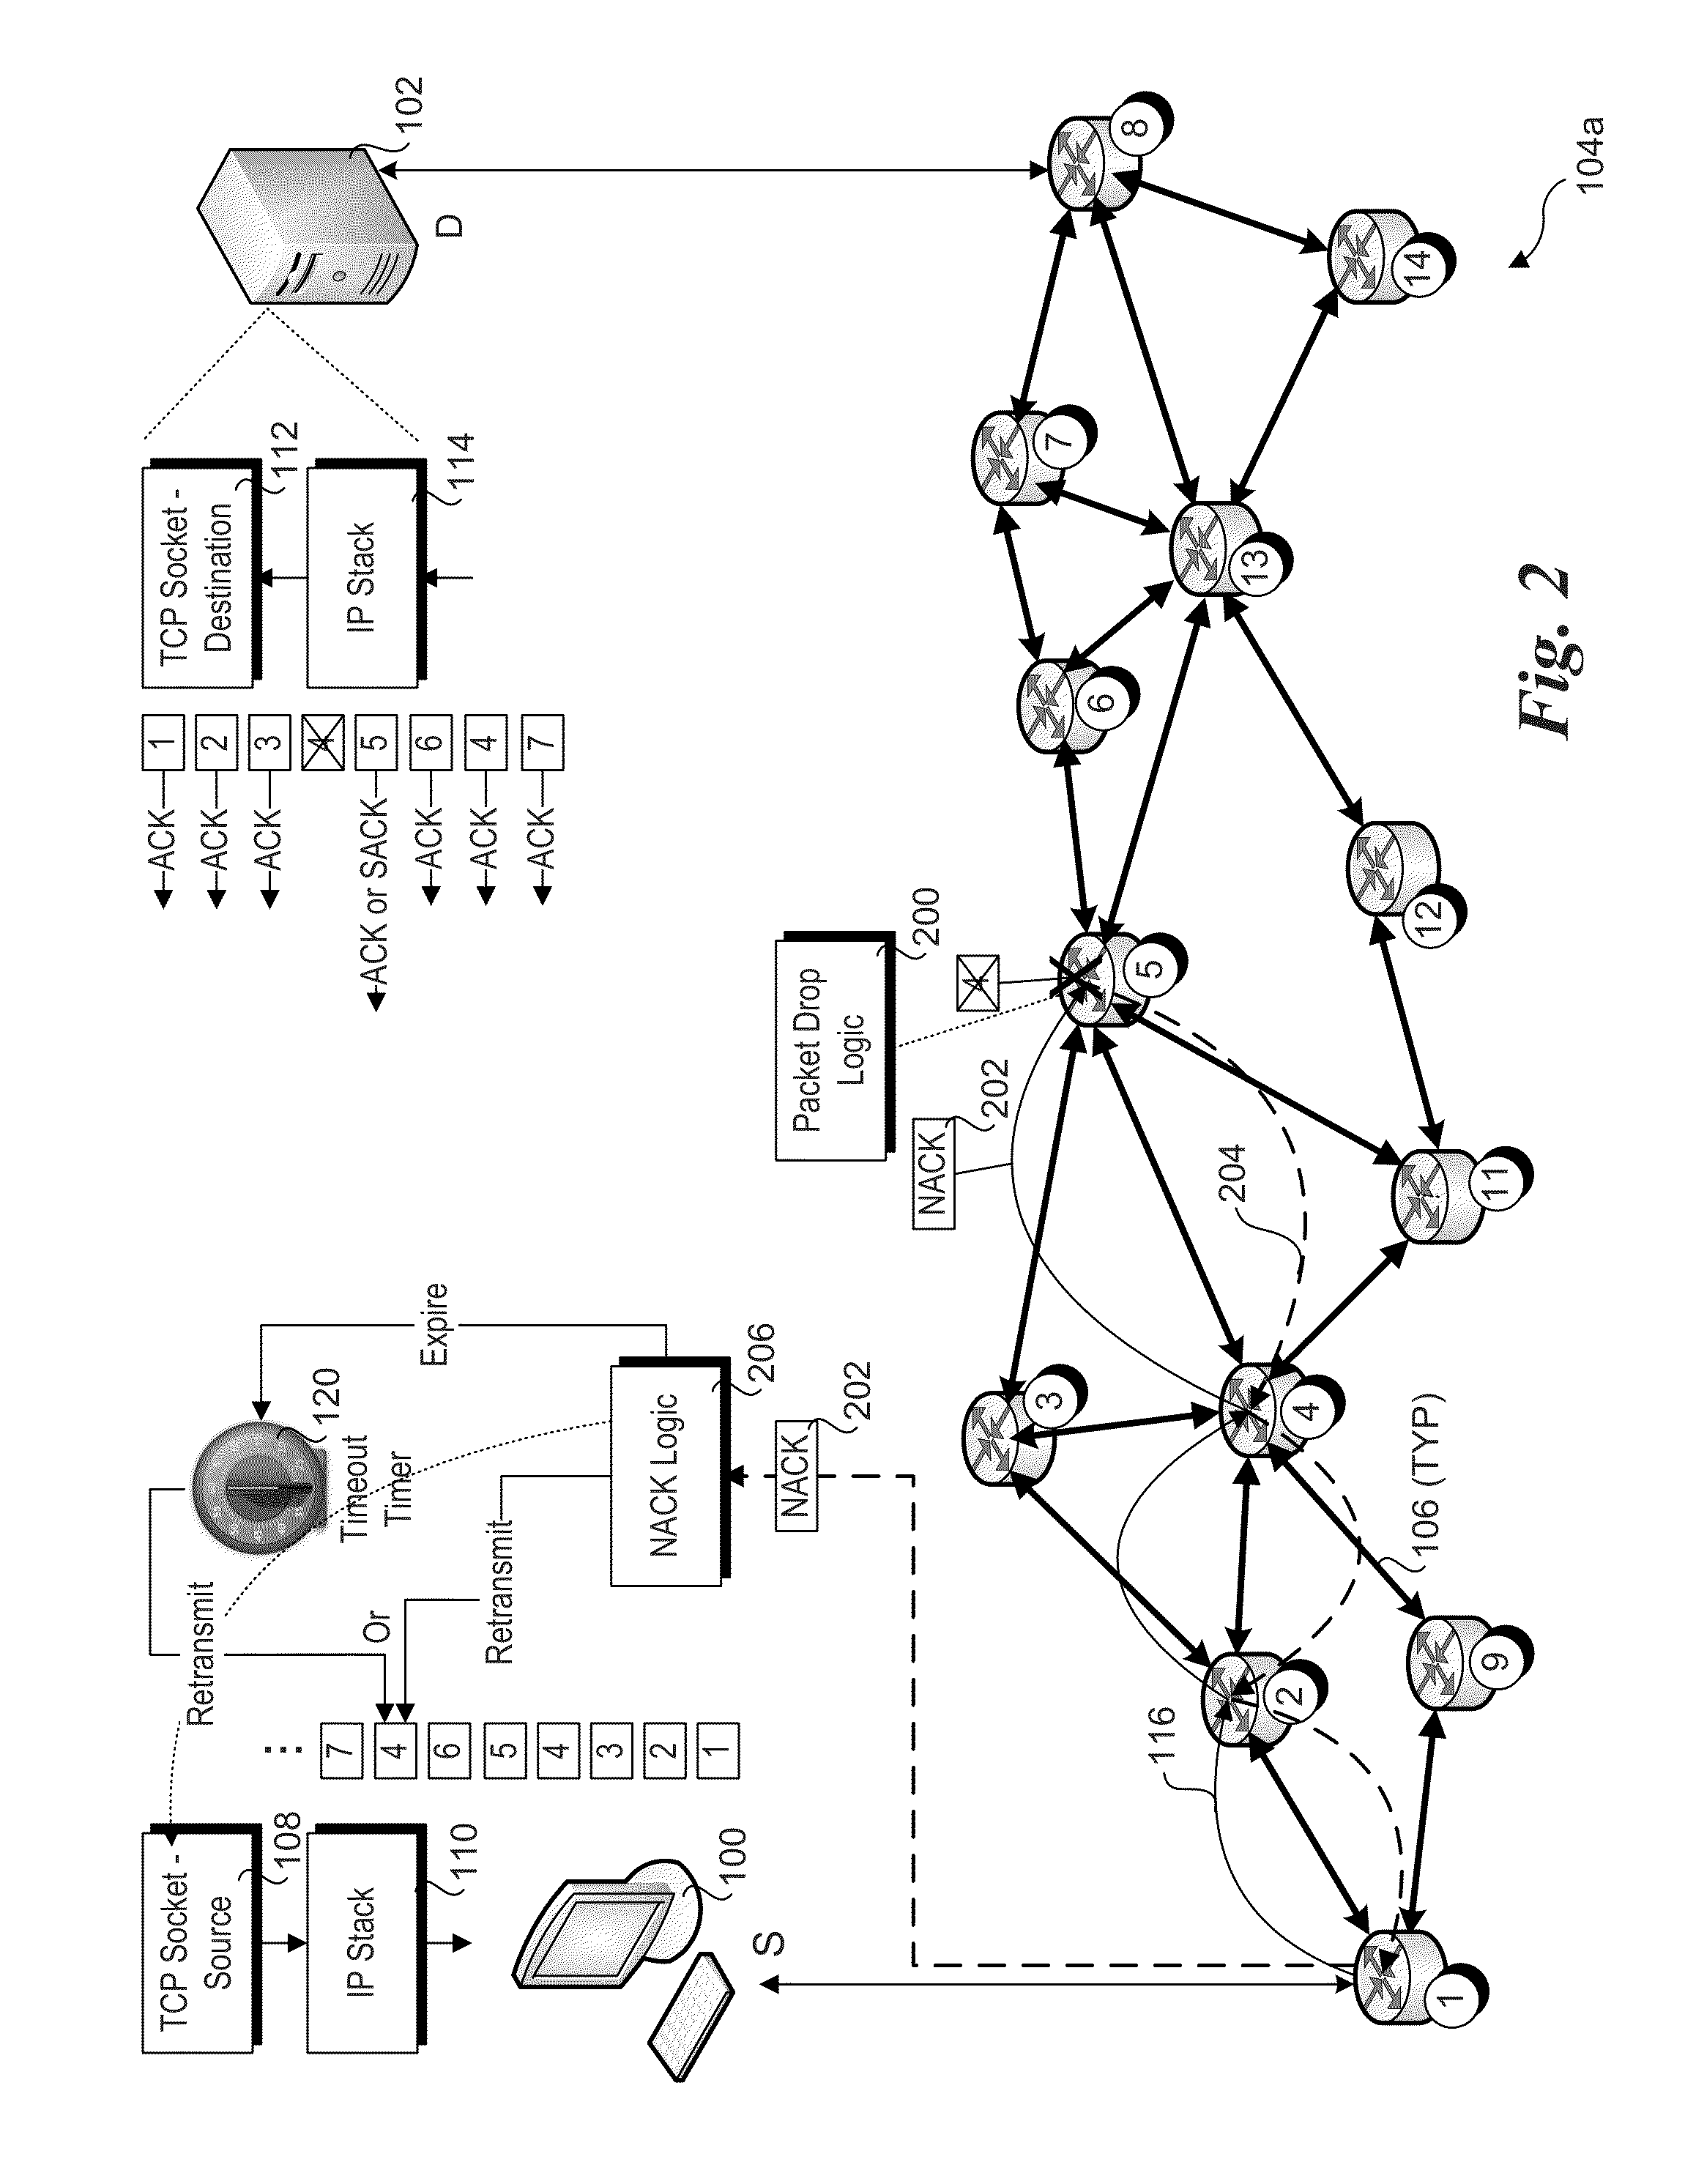 Notification by network element of packet drops